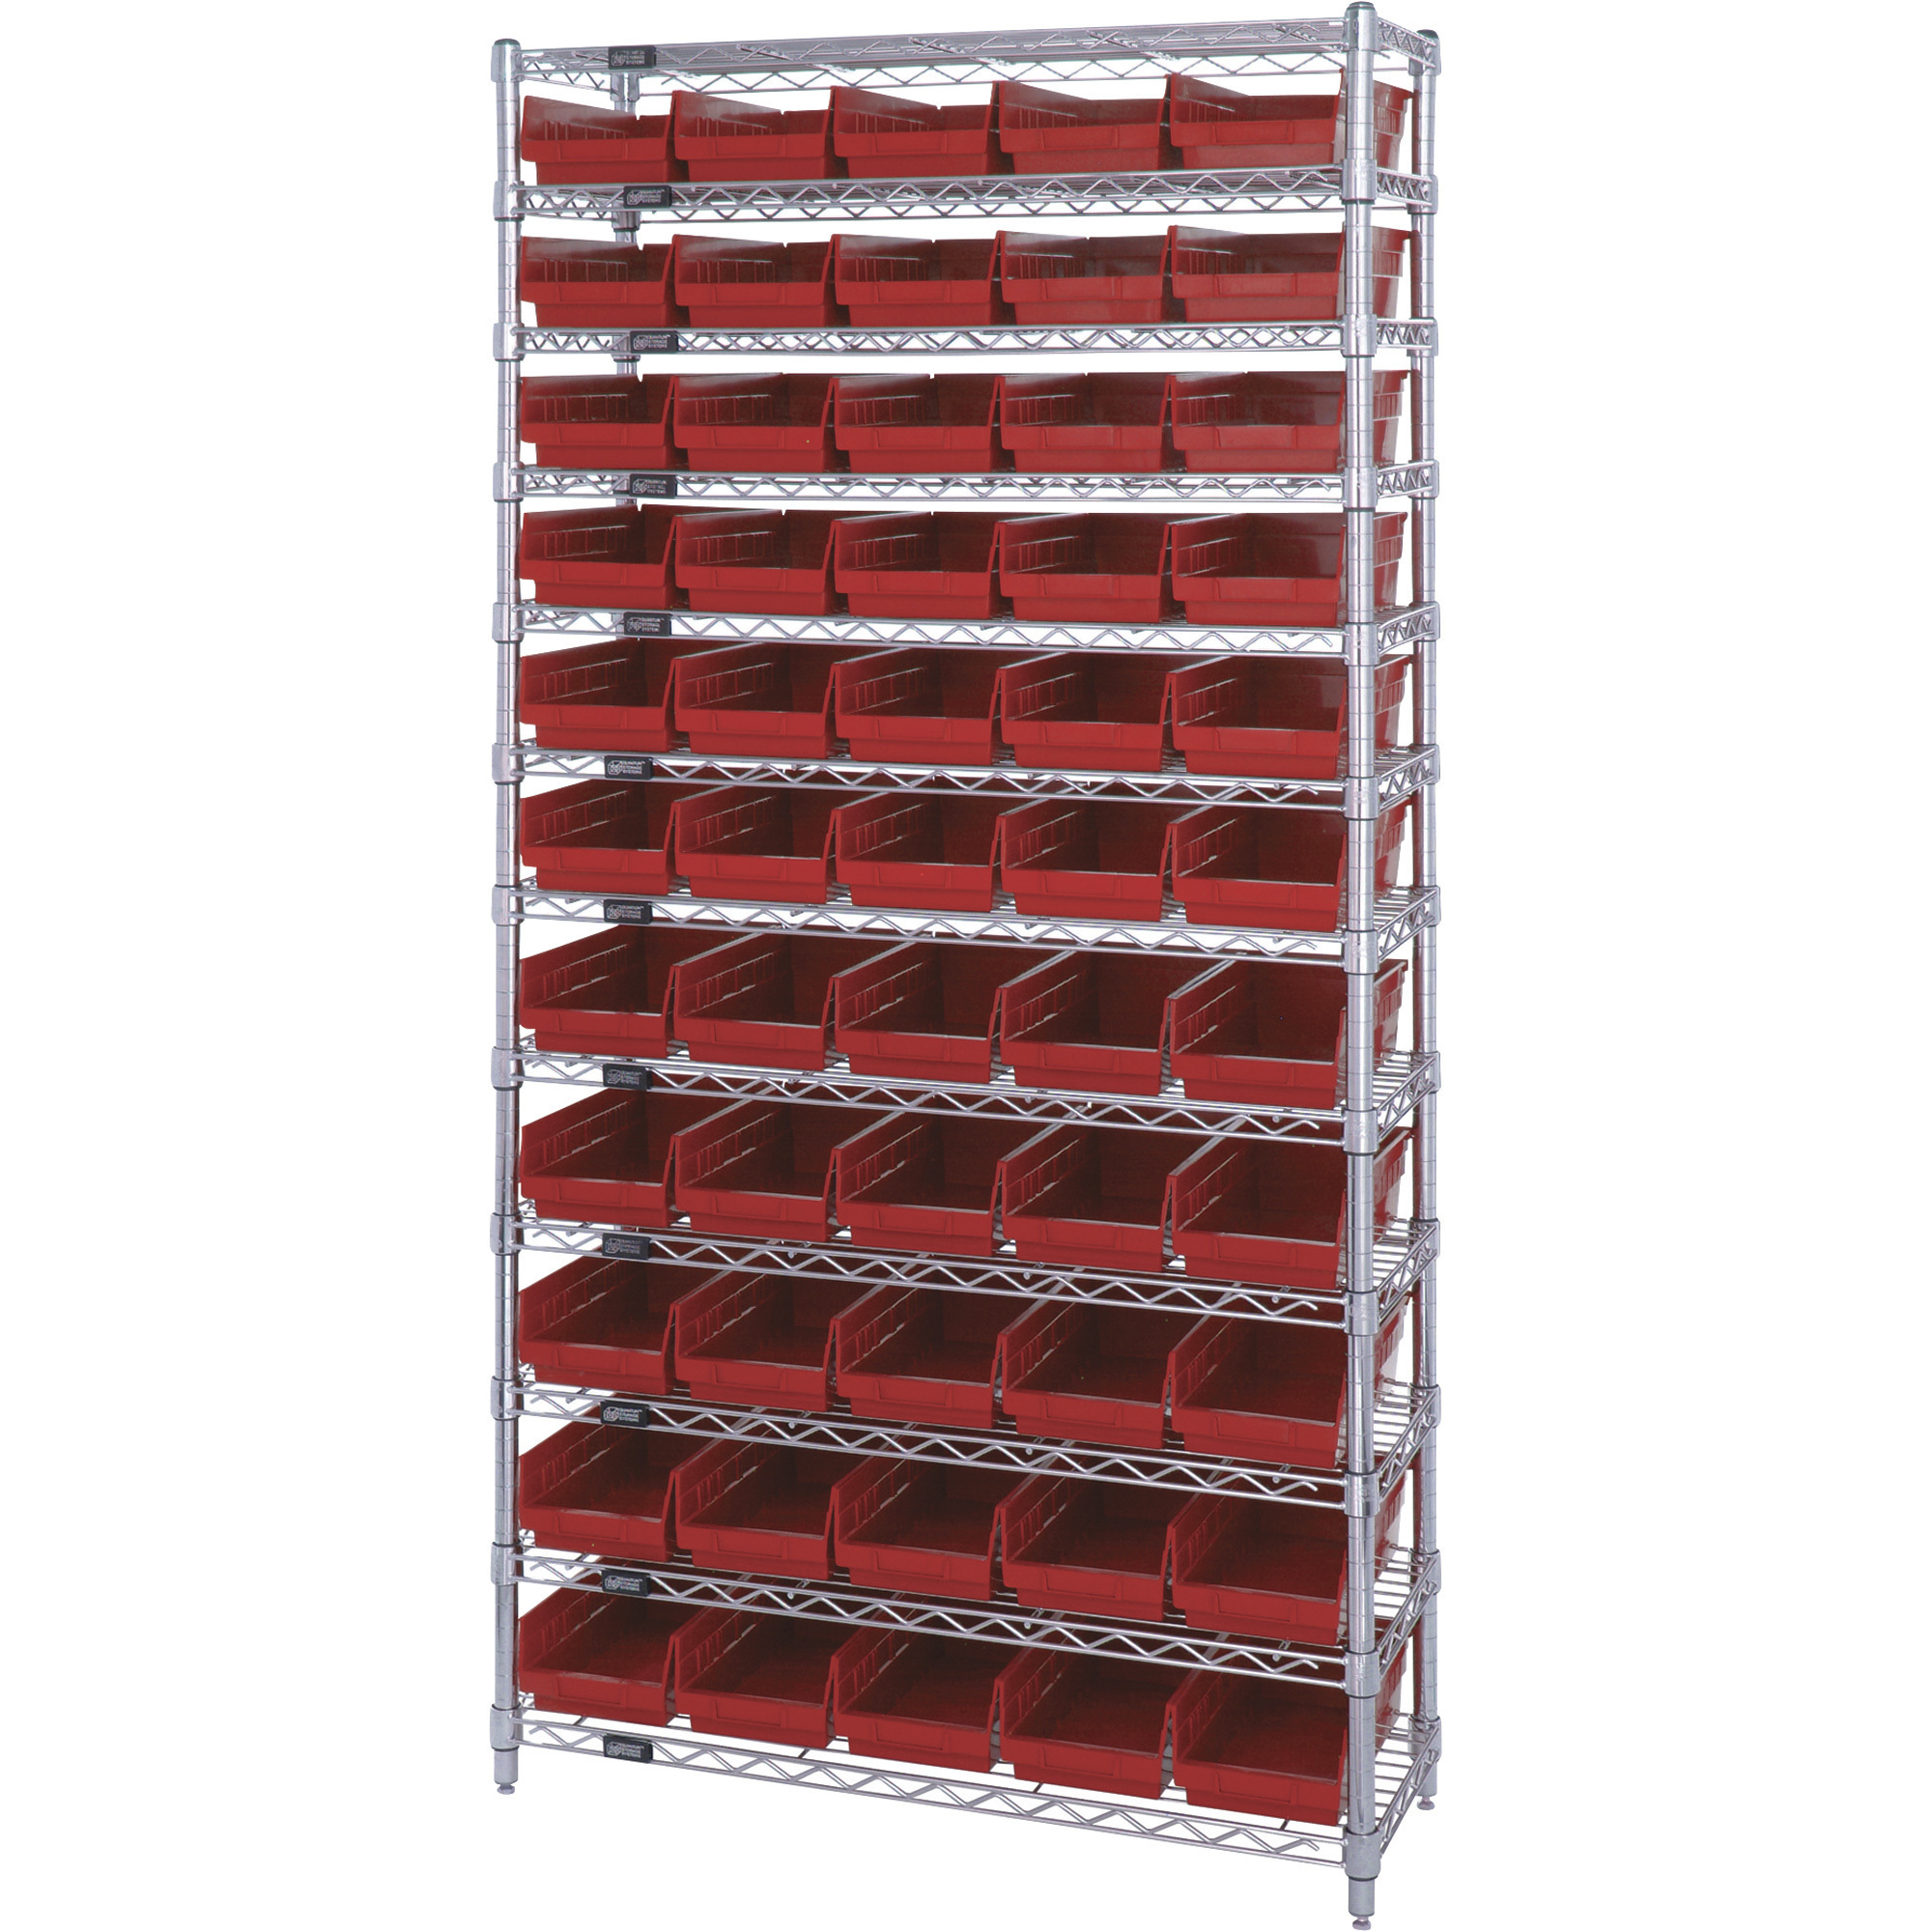 Quantum Storage Single Side Wire Chrome Shelving Unit with 55 Bins, 36Inch W x 18Inch D x 74Inch H, Red, Model WR12-104RD